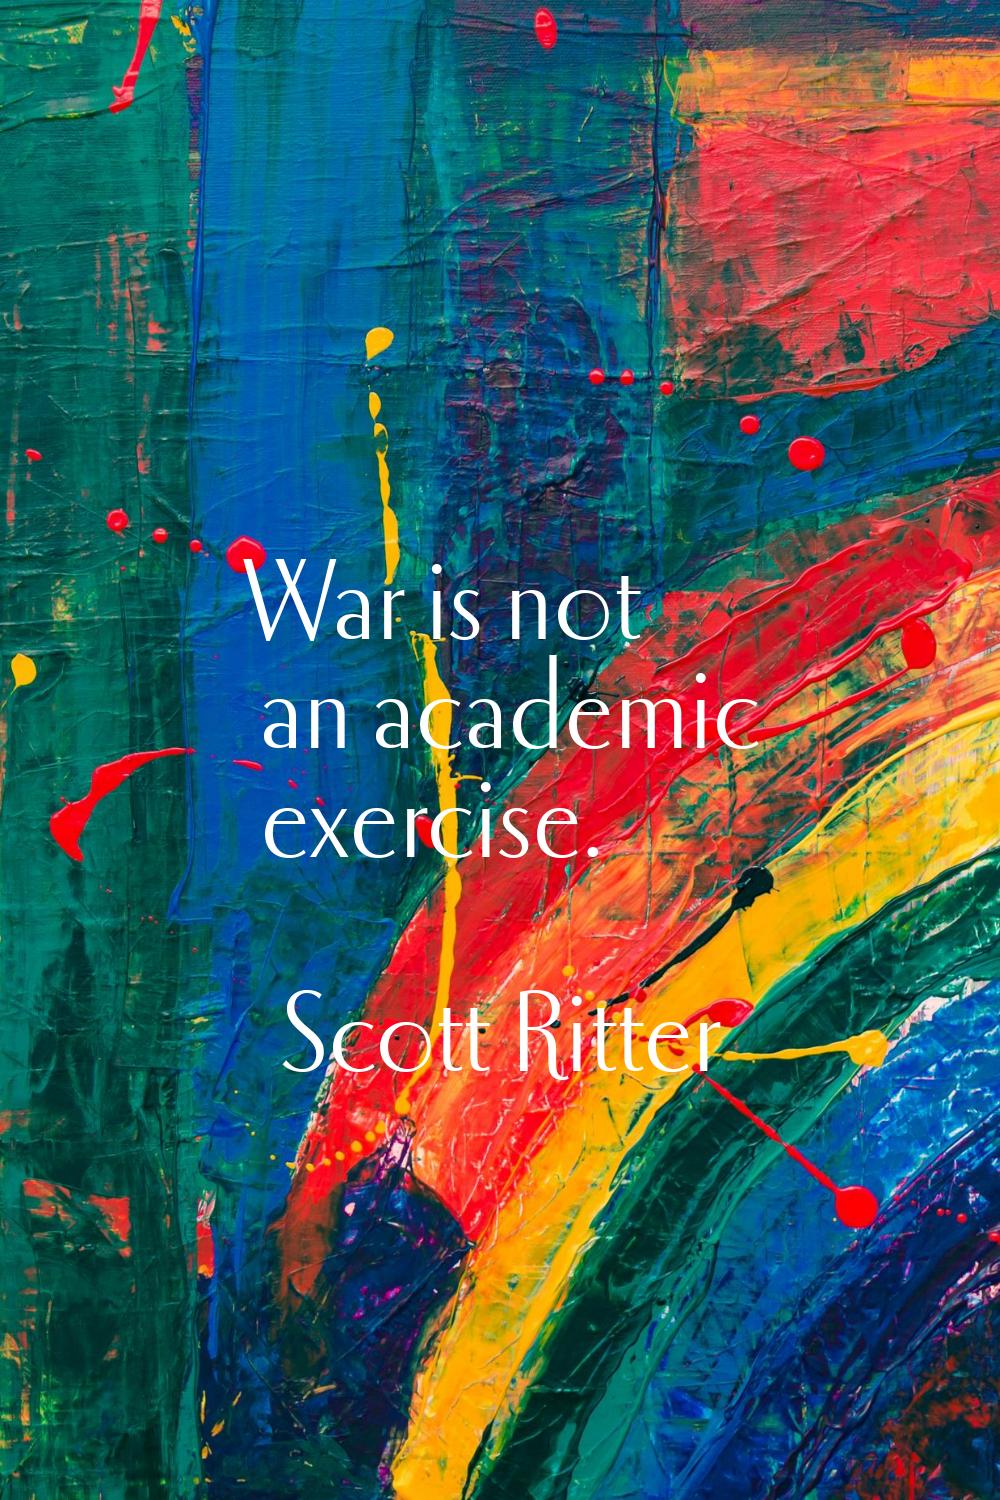 War is not an academic exercise.